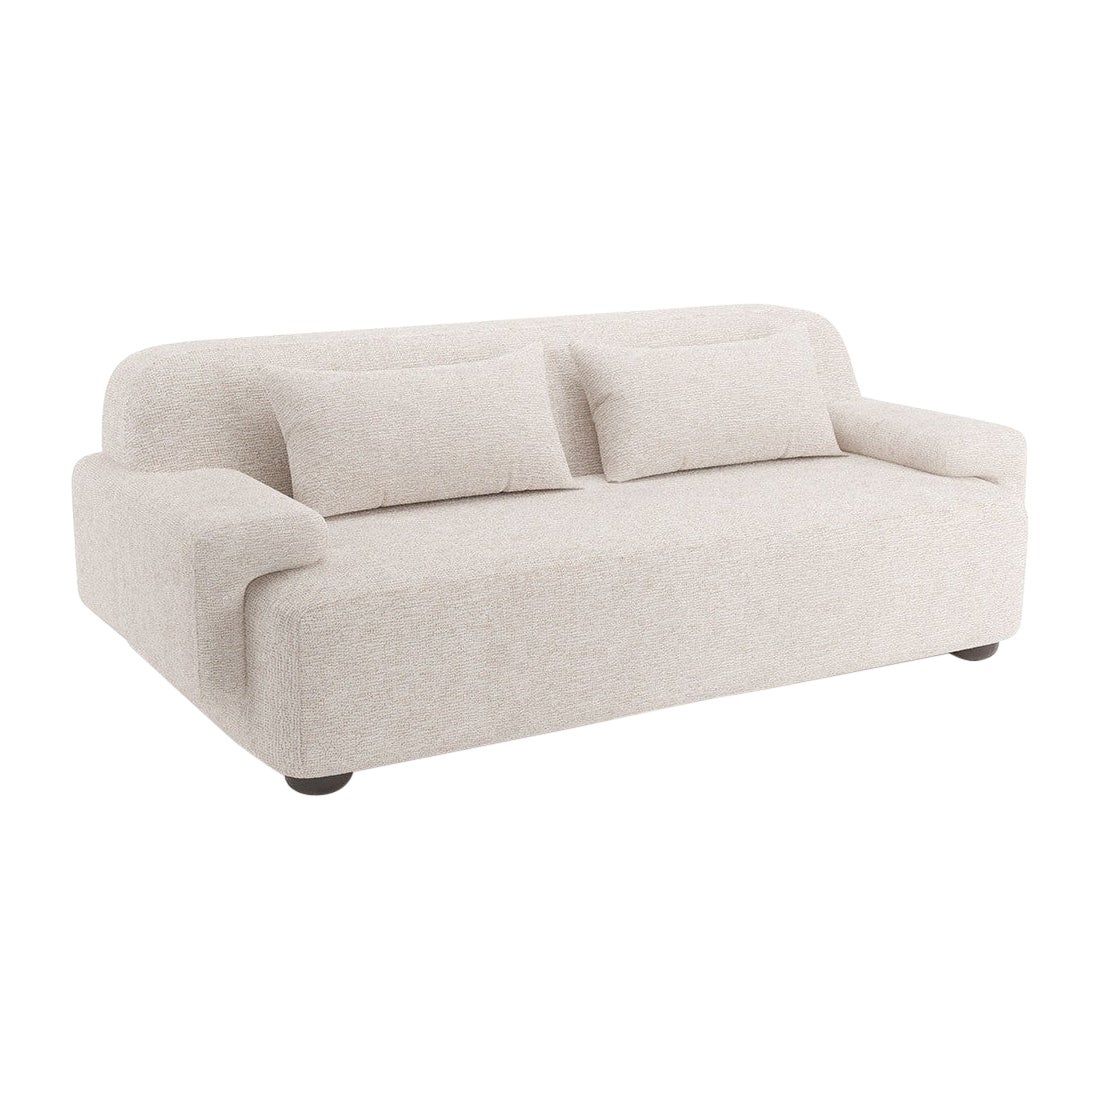 Popus Editions Lena 2.5 Seater Sofa in Otter Megeve Fabric with Knit Effect